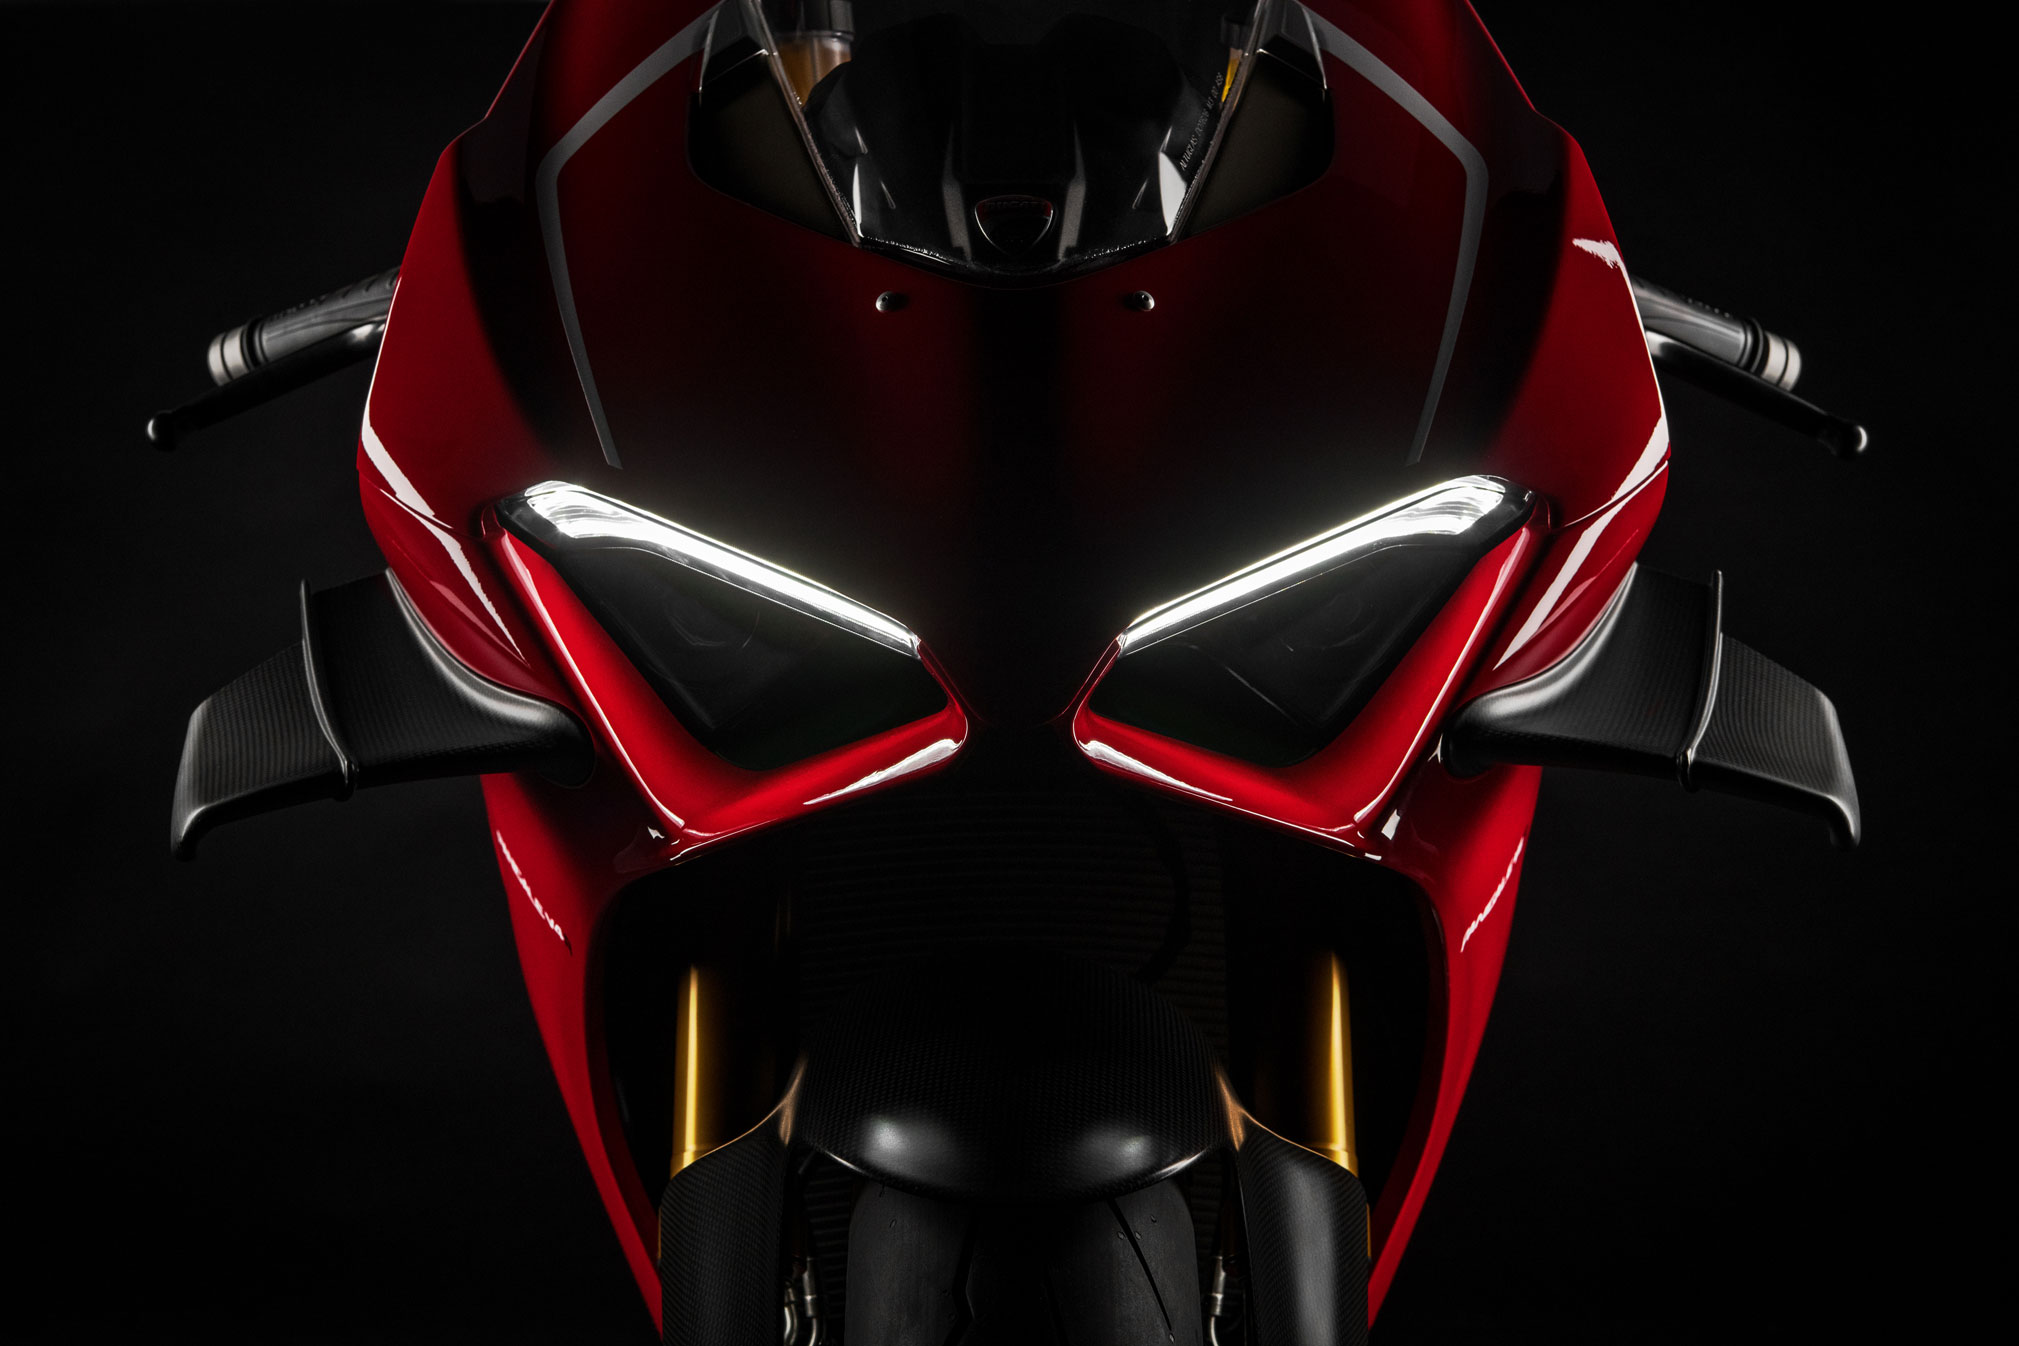 2022 Ducati Panigale V4R Guide  Total Motorcycle